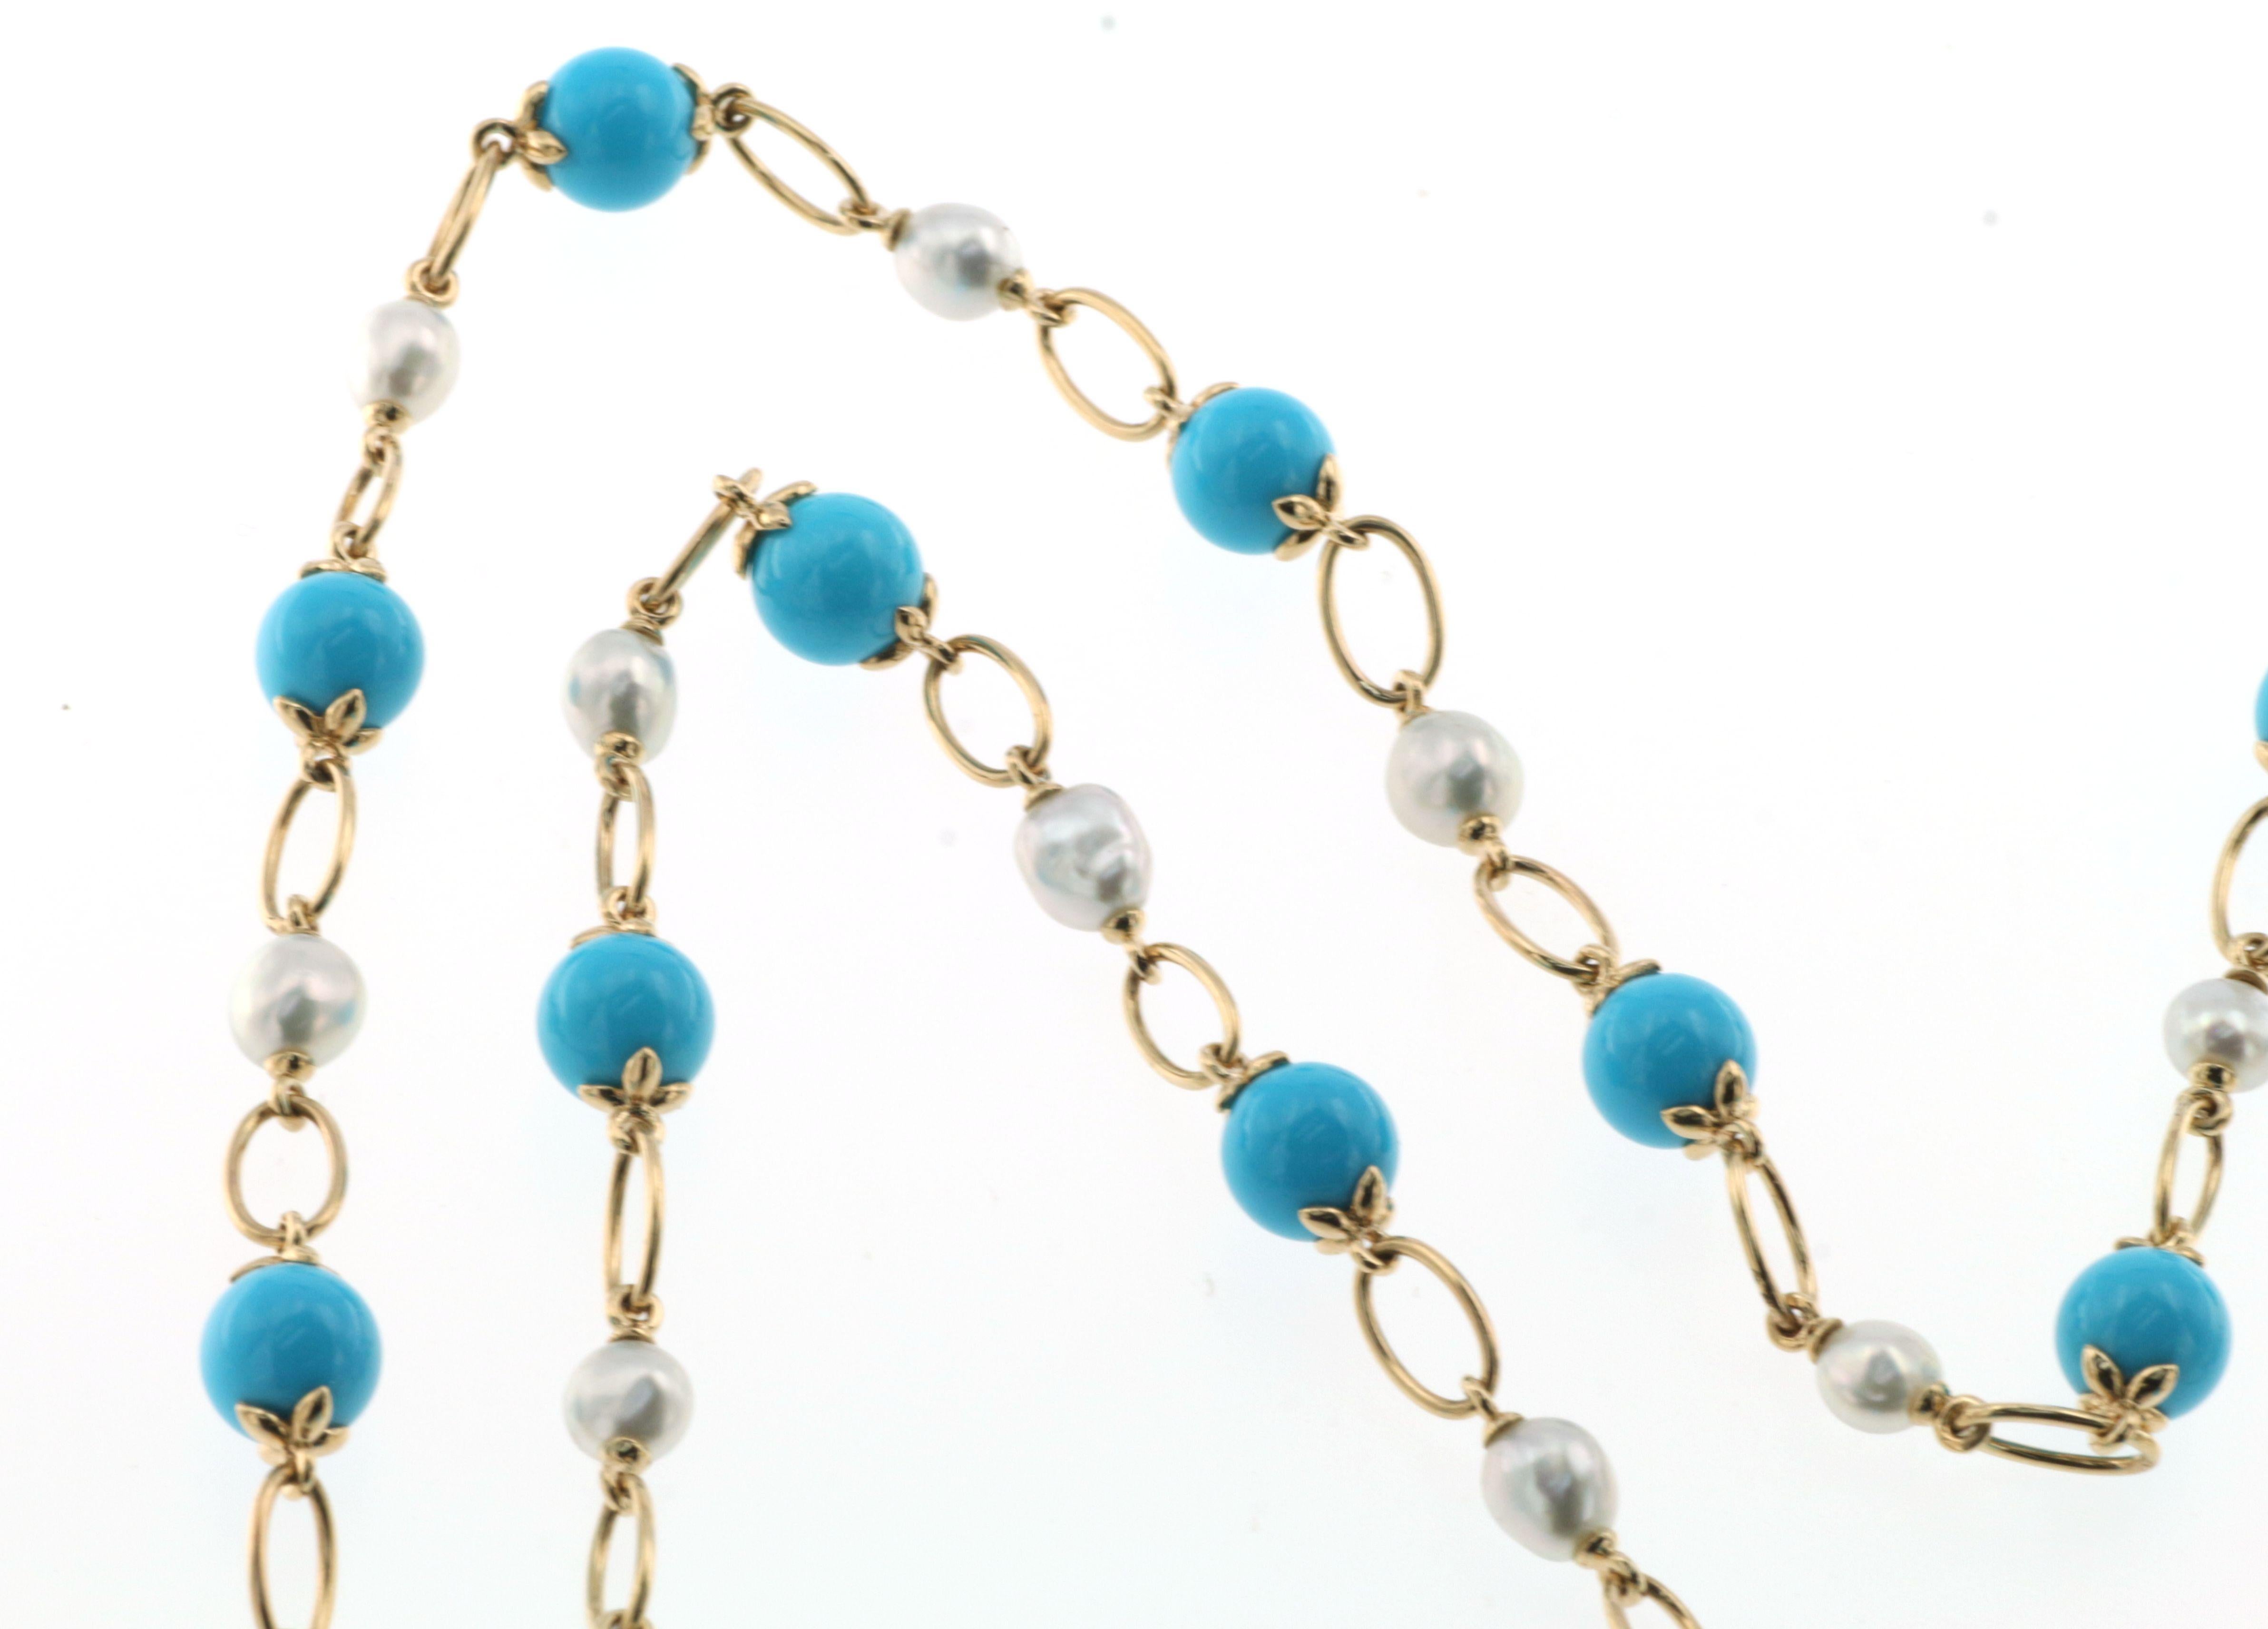 Bead Turquoise South Sea Pearl Necklace in 14 Karat Yellow Gold